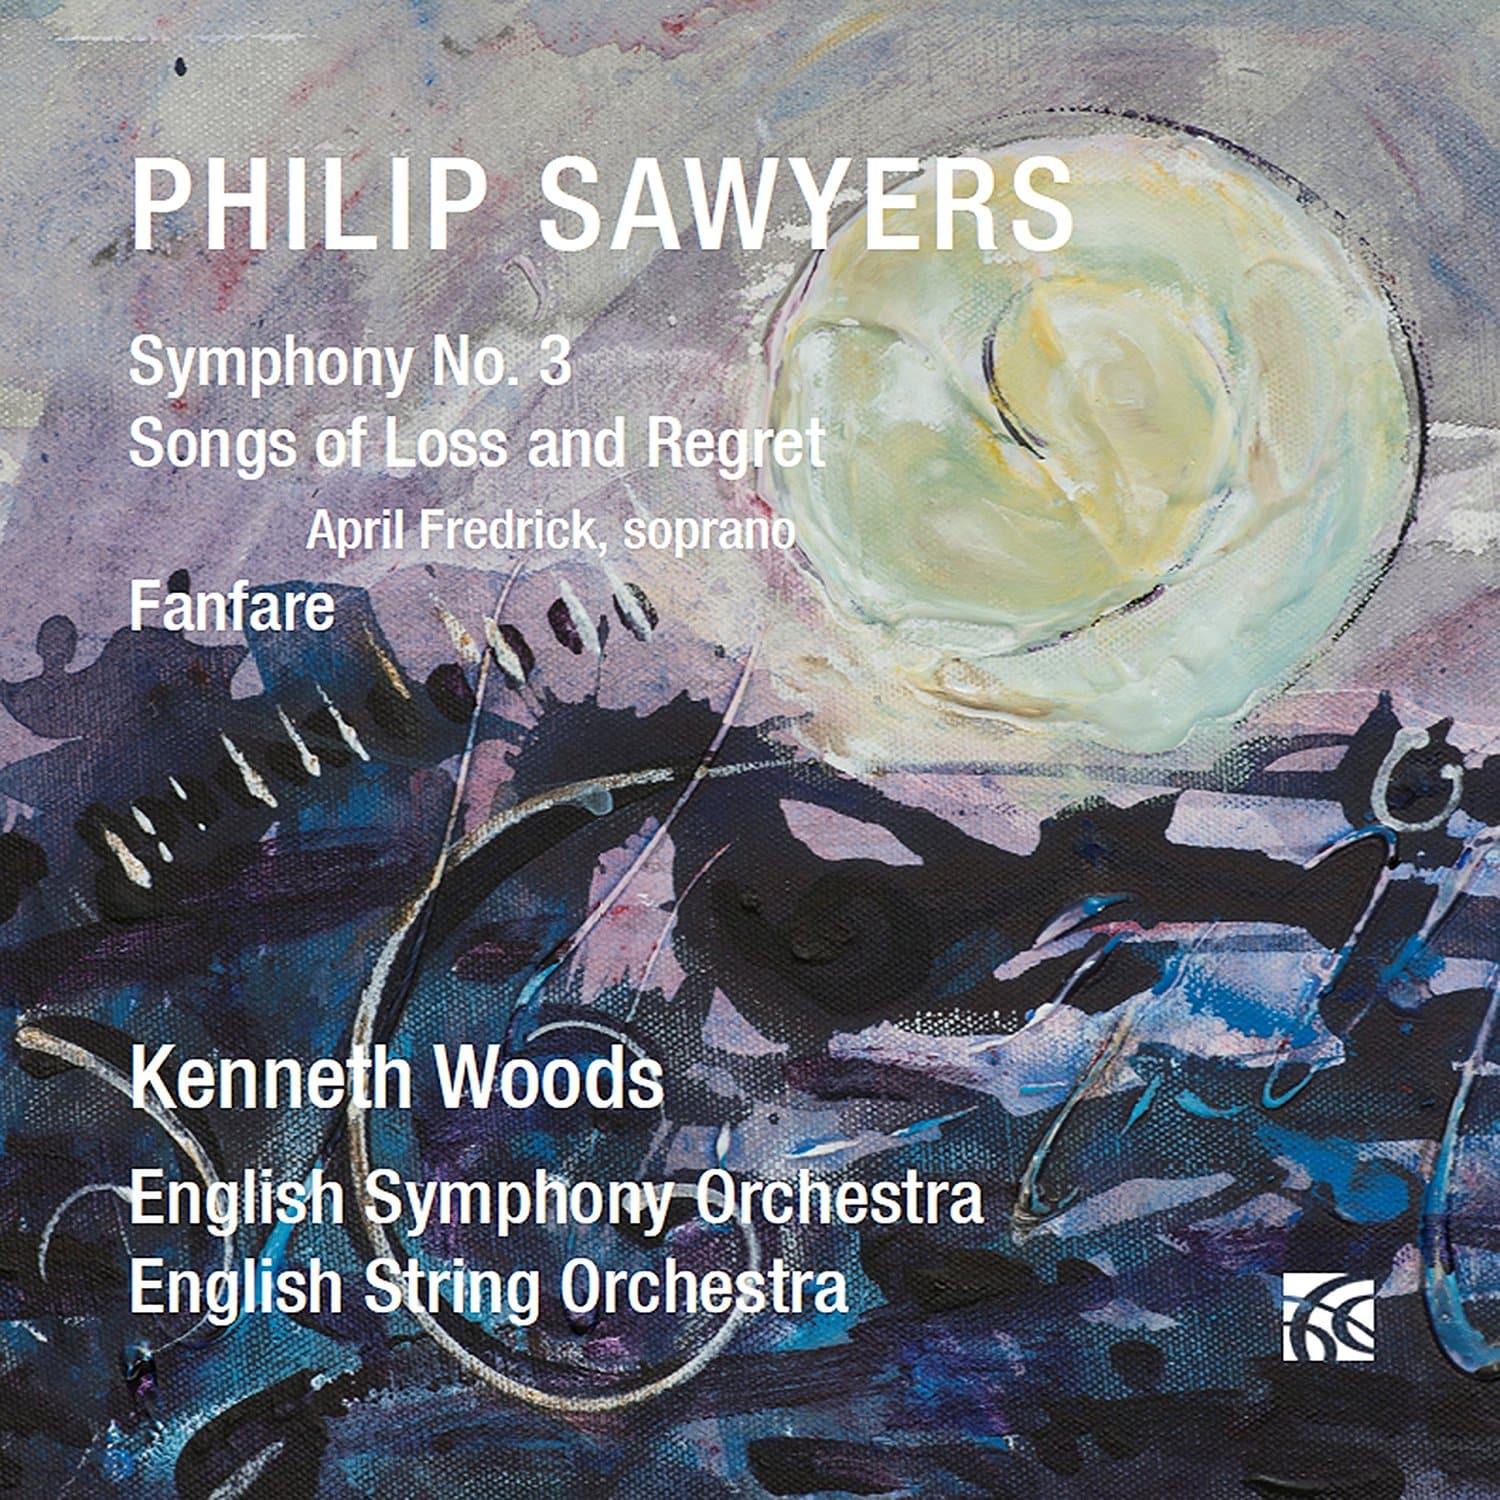 CD Review- Gramophone Magazine on Sawyers- Symphony no. 3, Songs of Loss and Regret, Fanfare